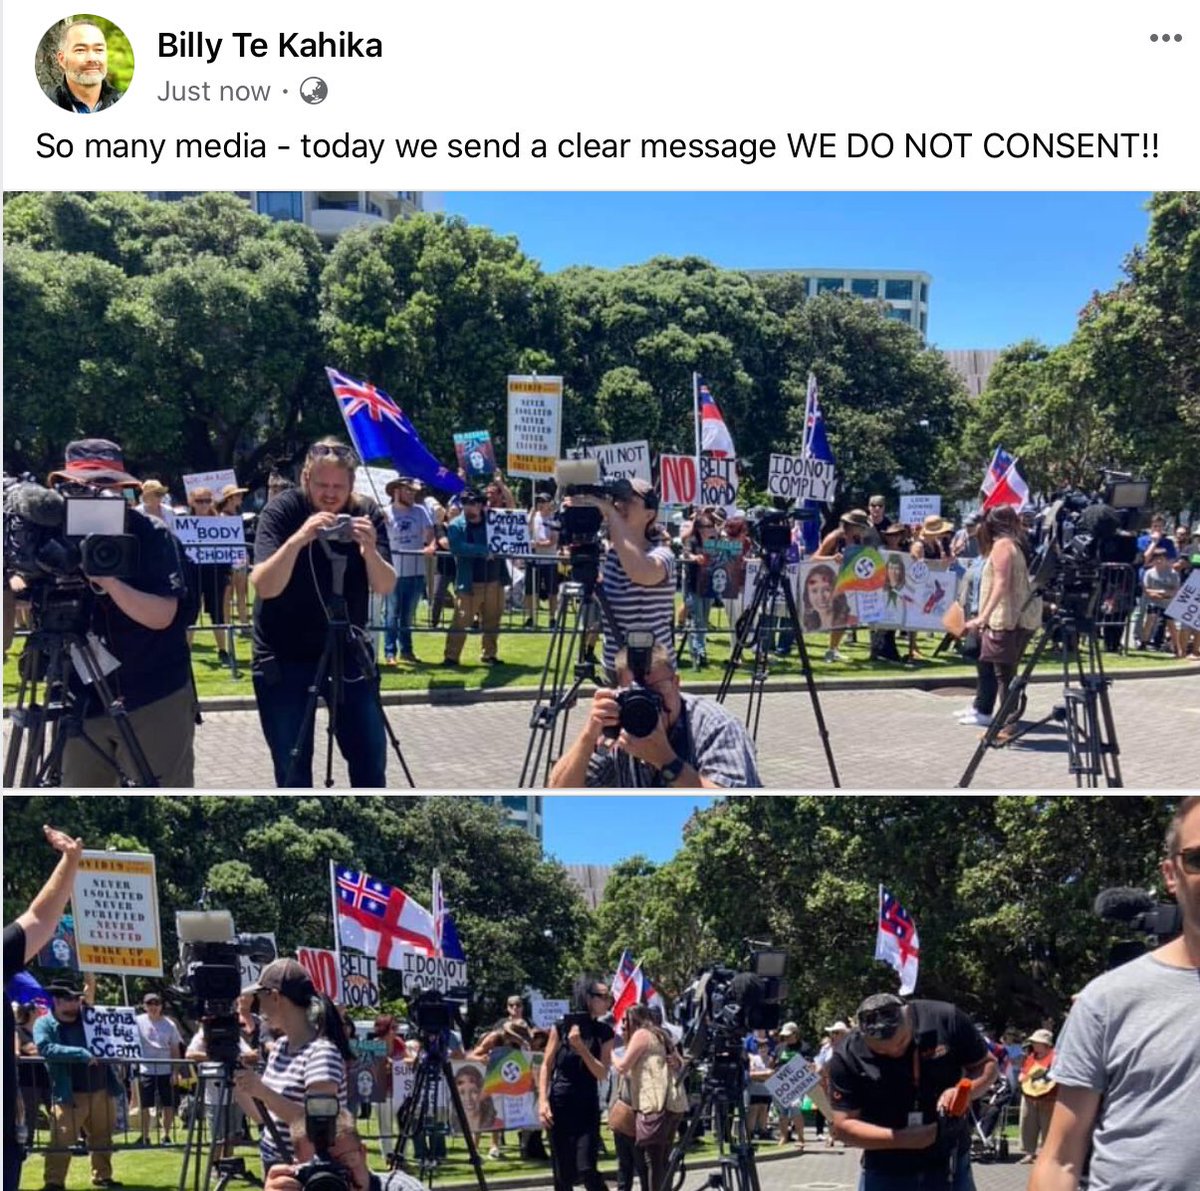 Billy is getting real excited about the media attention, more “fake news media” means more advertising for koha. Isnt’ it great he has the freedom to hold another ‘protest’ because the last one wasn’t very profitable for him. #BillyTakeTheKoha  #FreedumbRally  #NZmagats